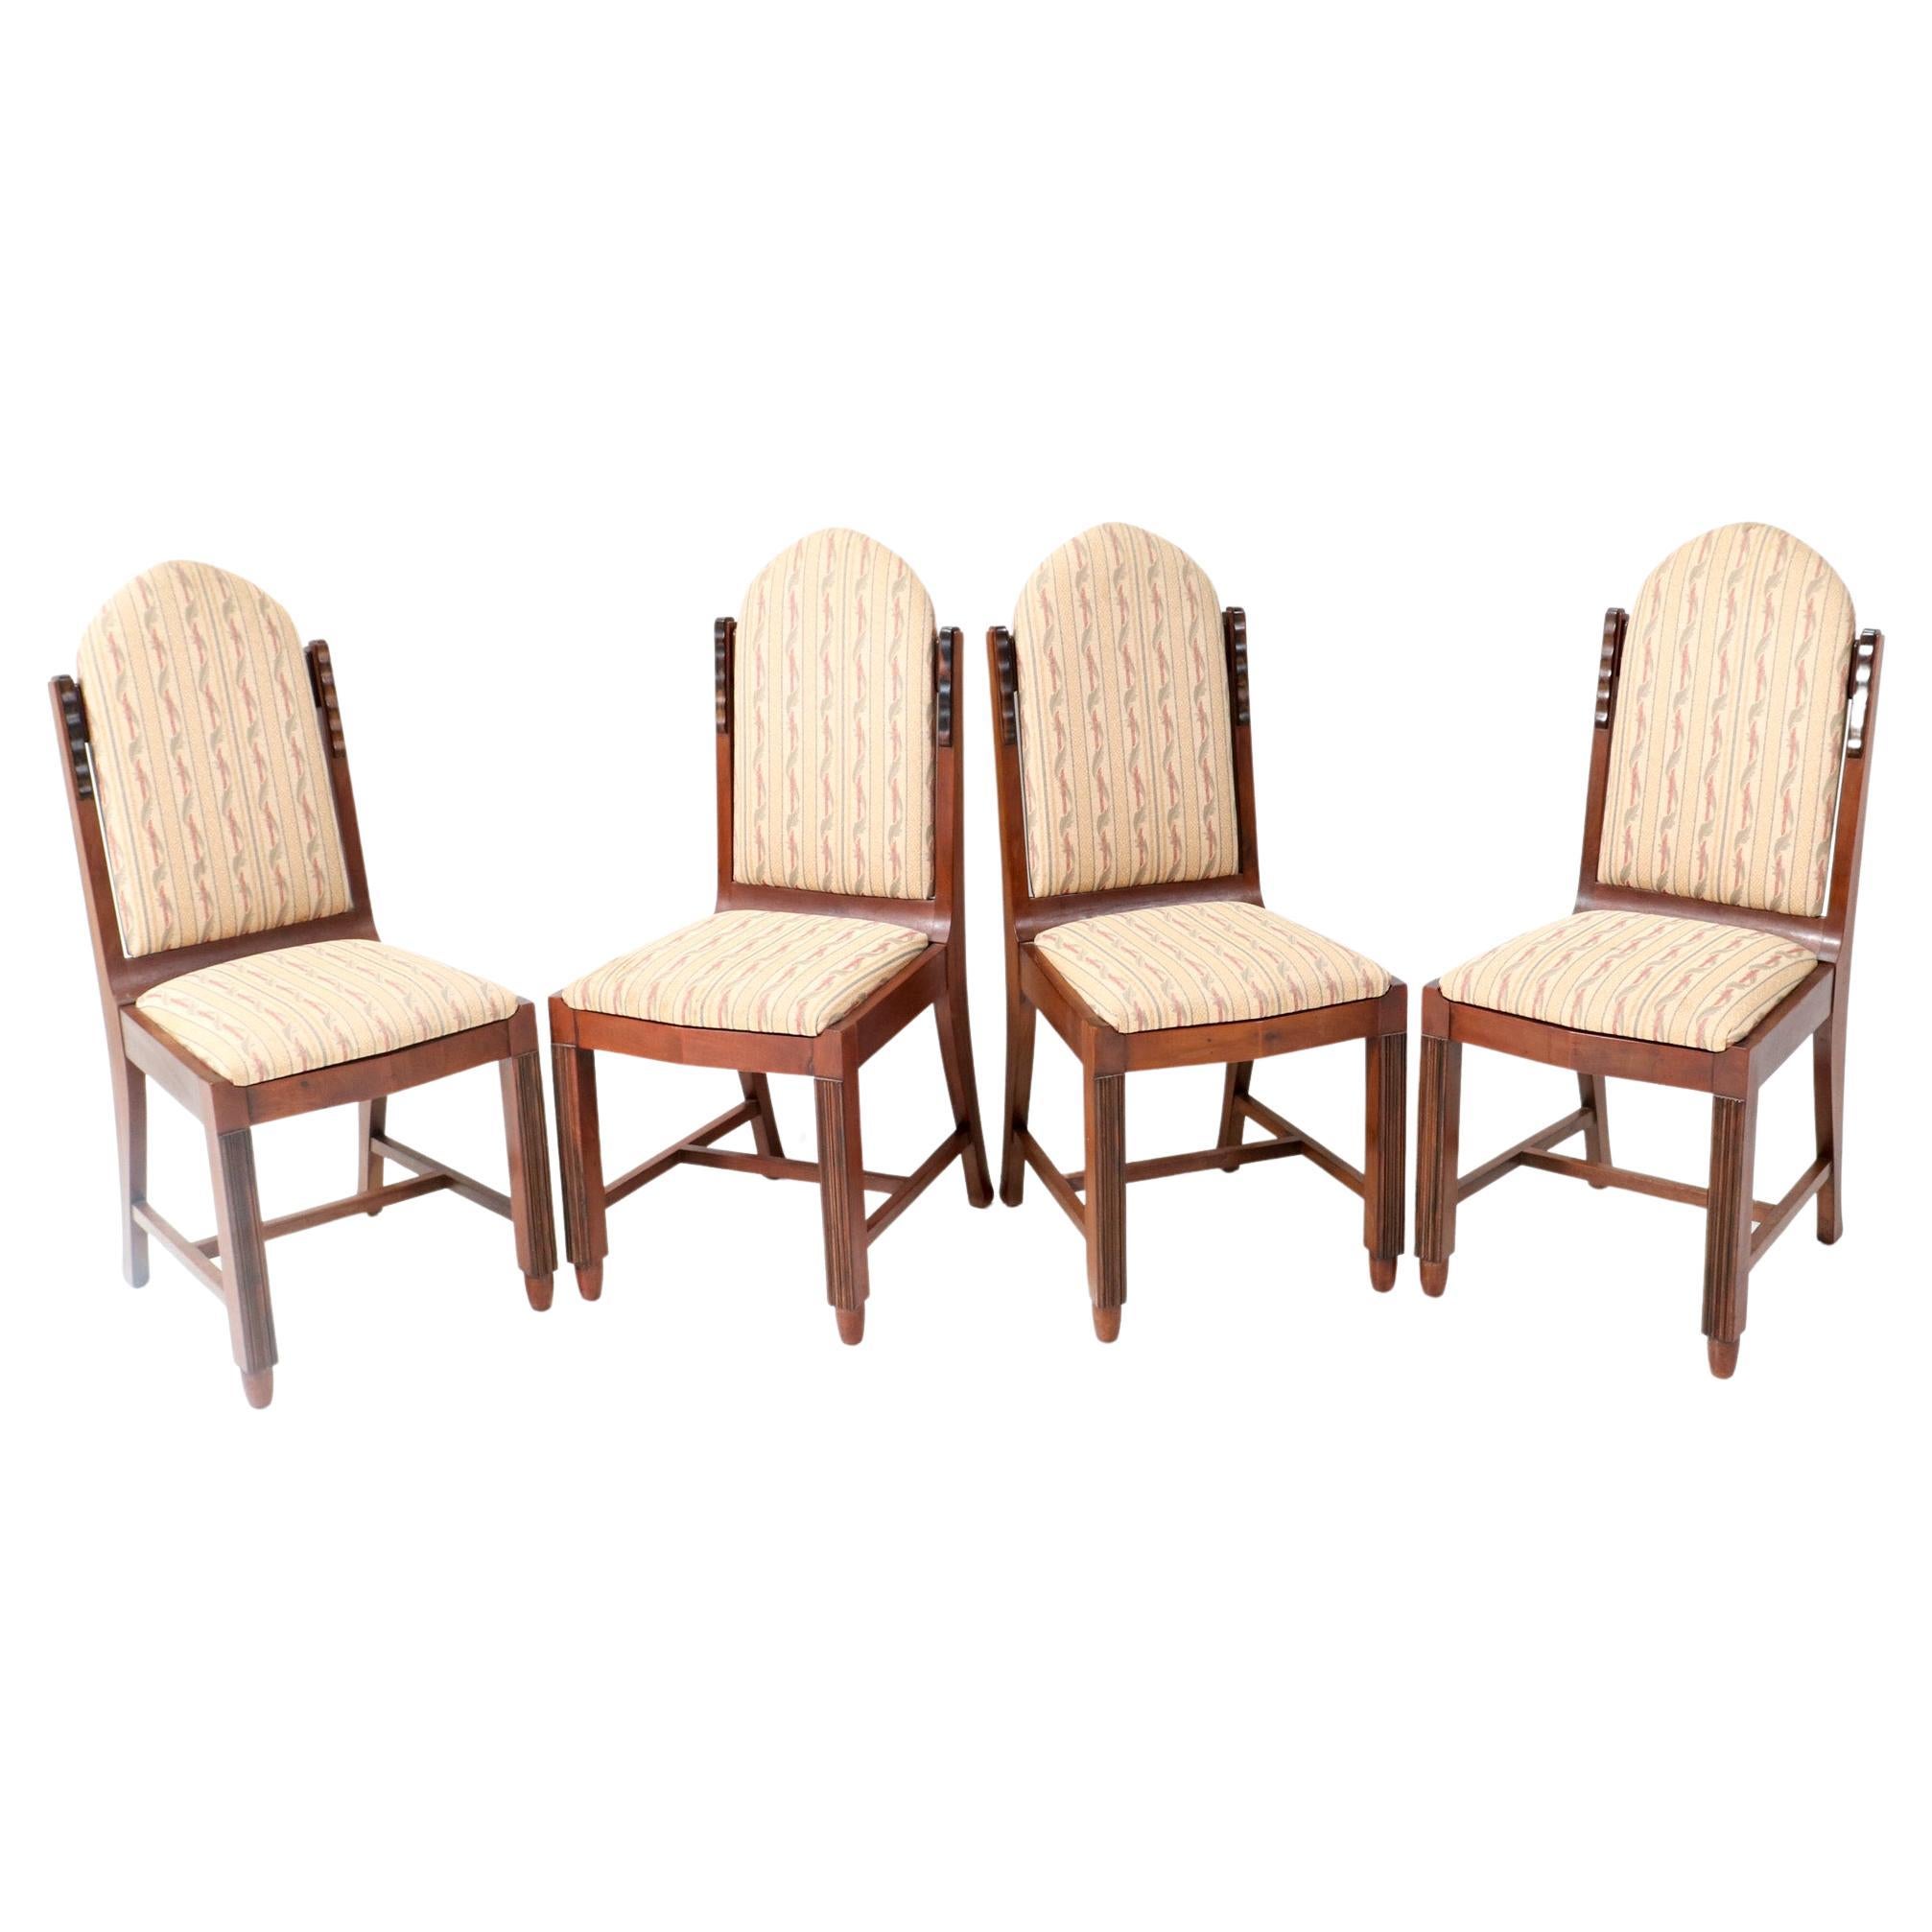 Four Walnut Art Deco Amsterdamse School Dining Room Chairs by Fa. Drilling, 1924